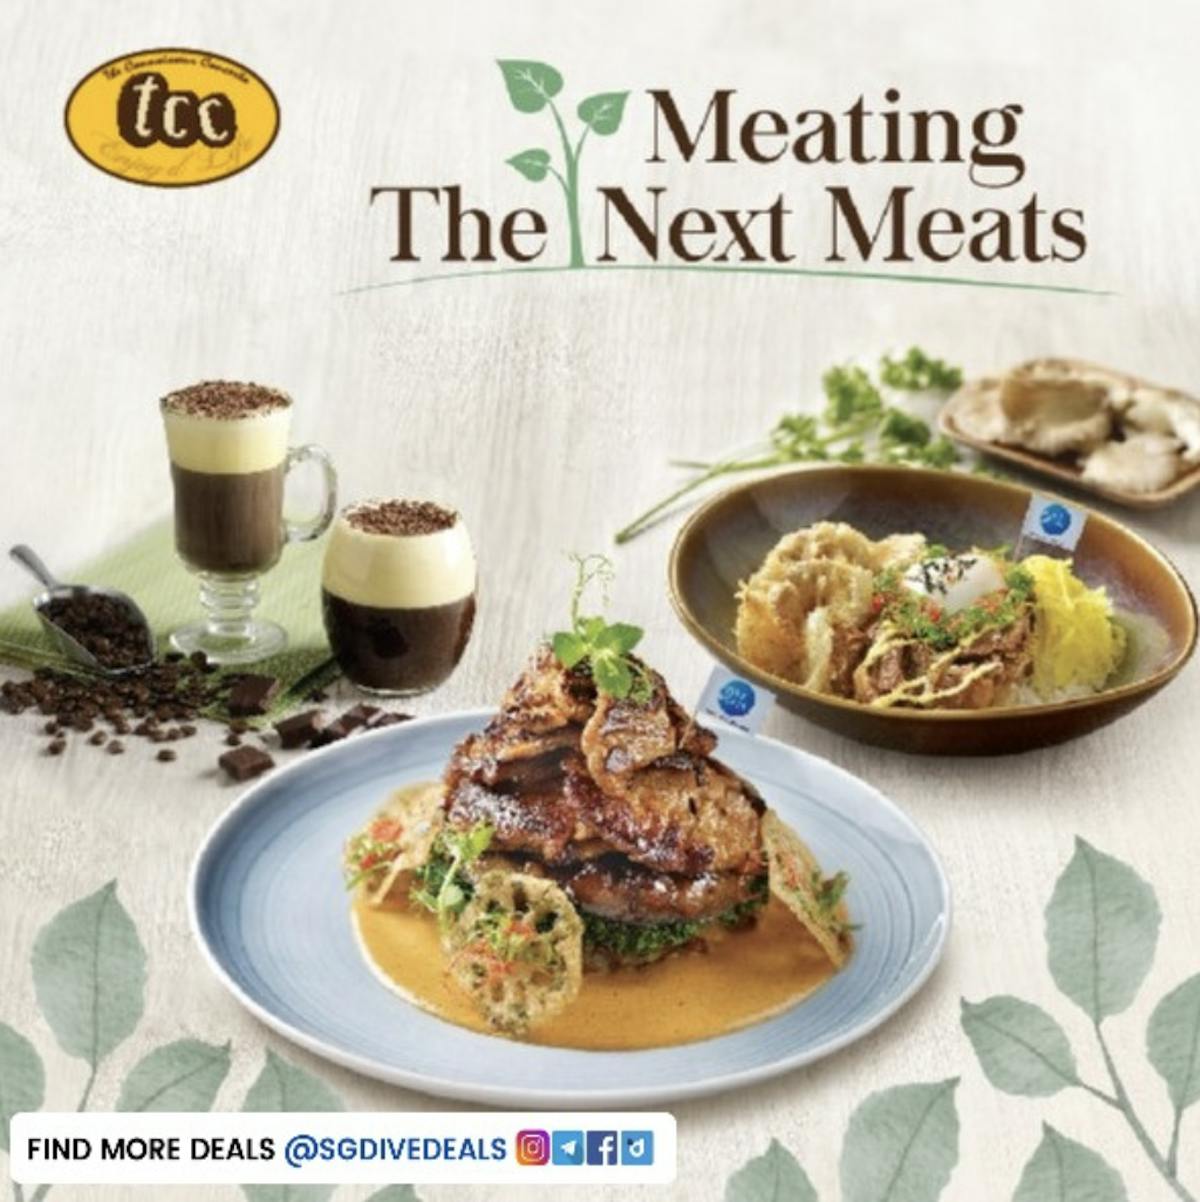 Meeting The Next Meats promotion